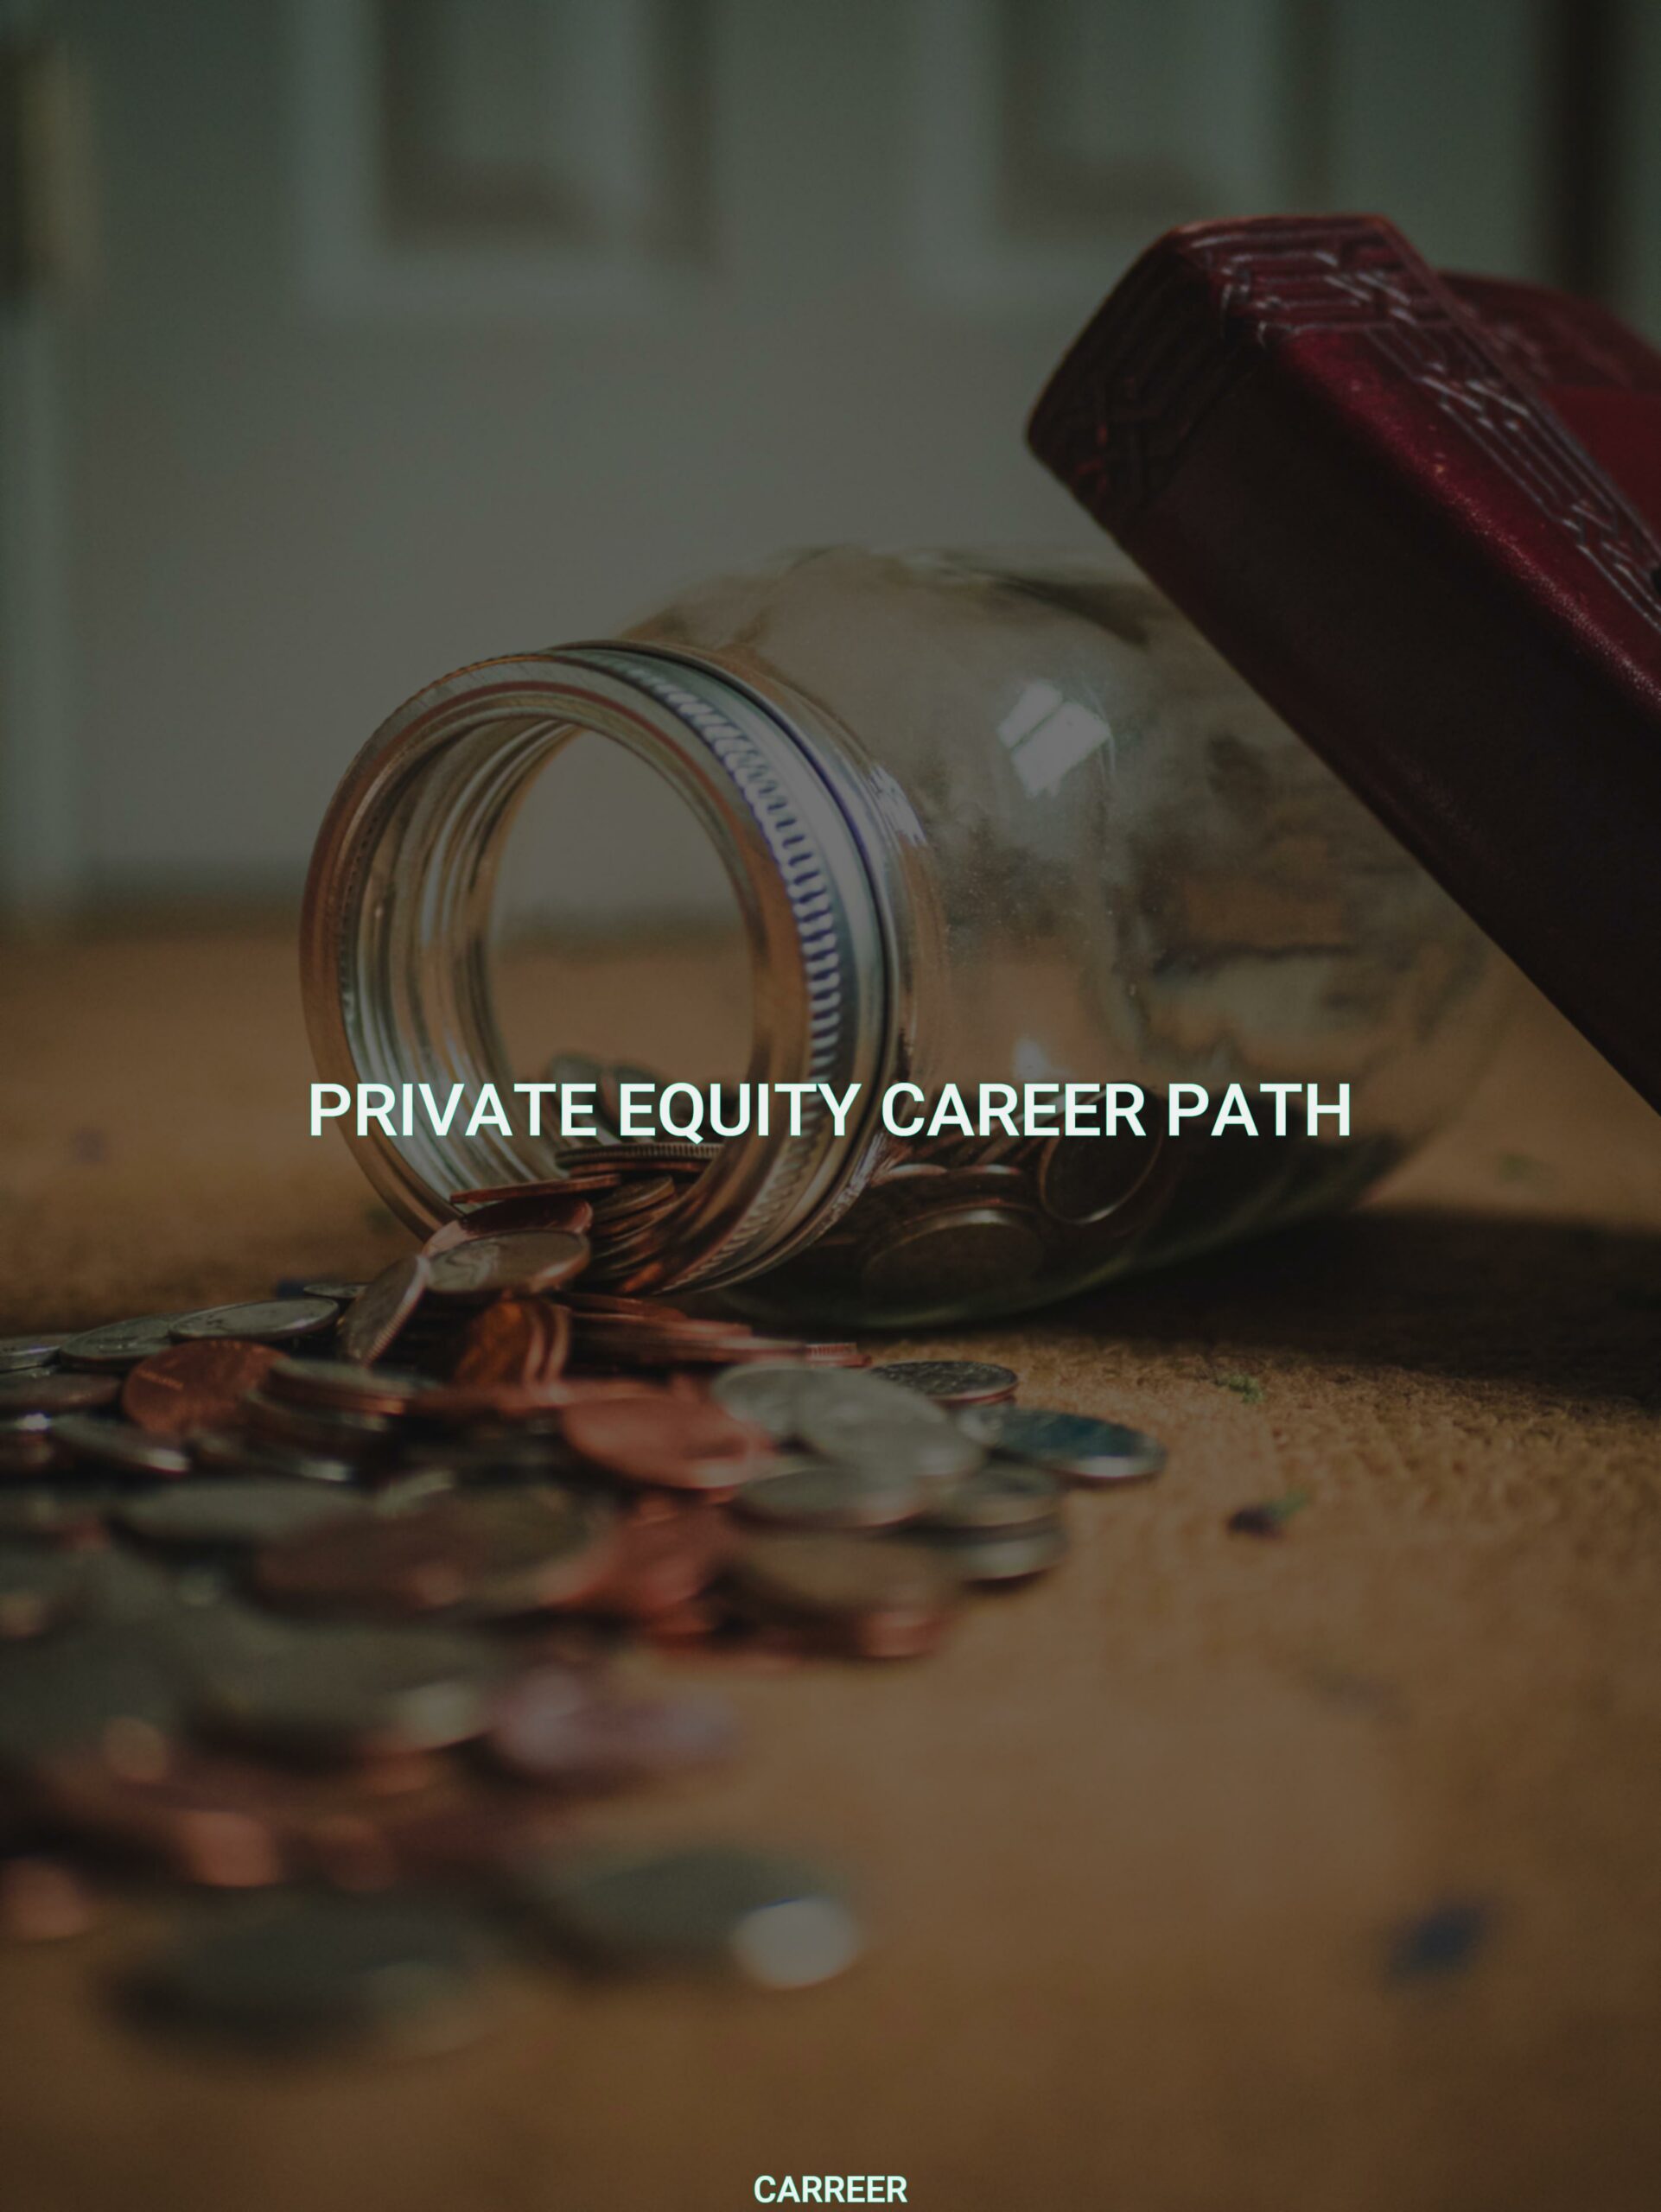 Private equity career path